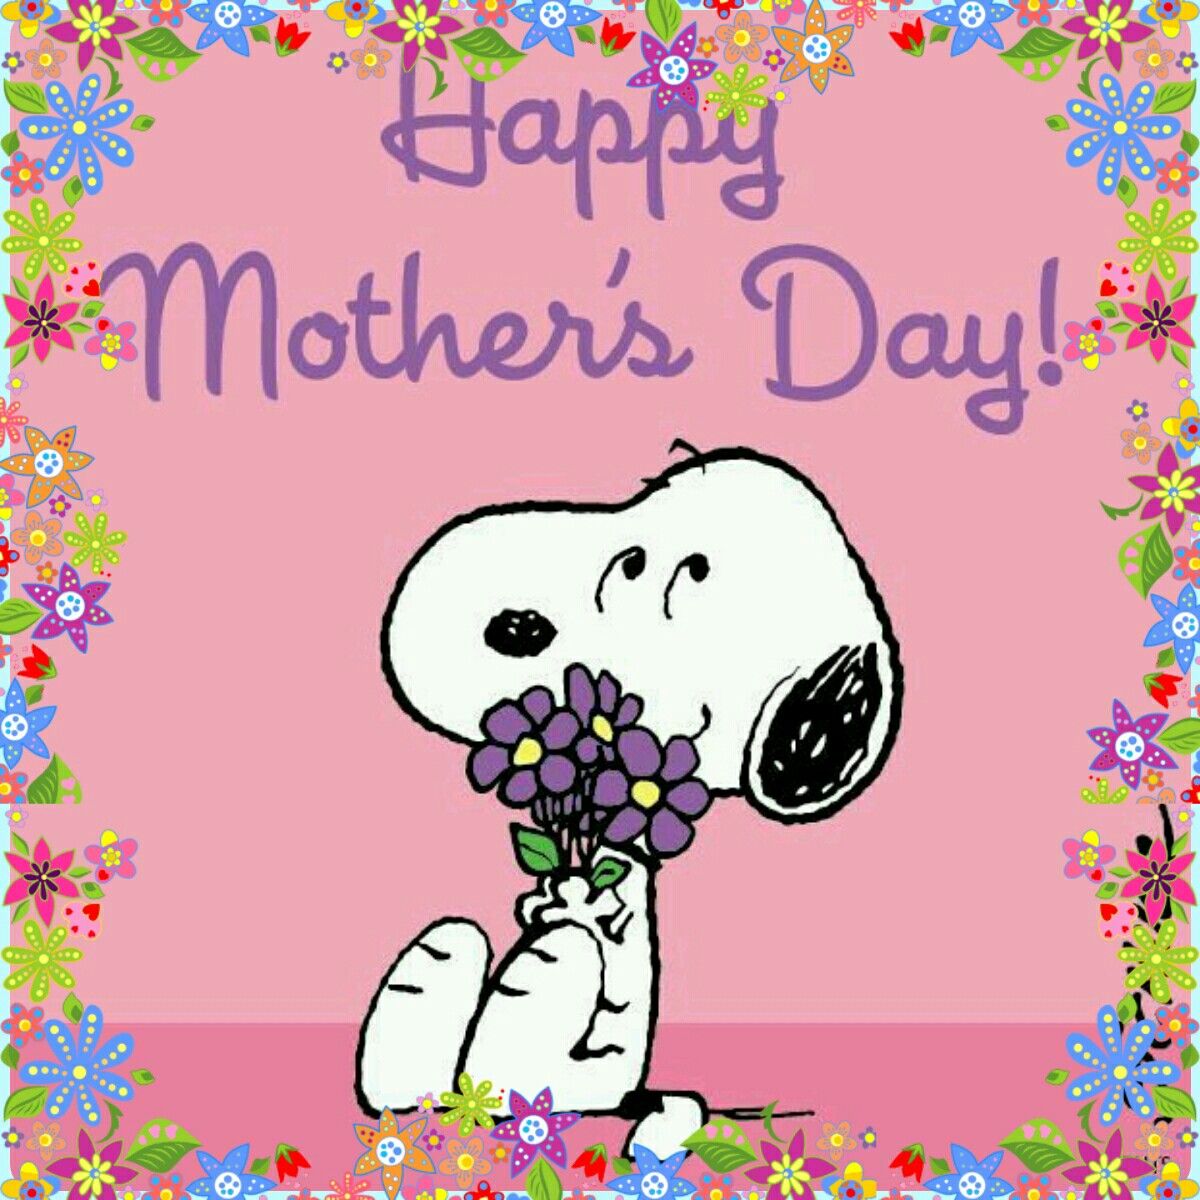 Snoopy happy mother's day